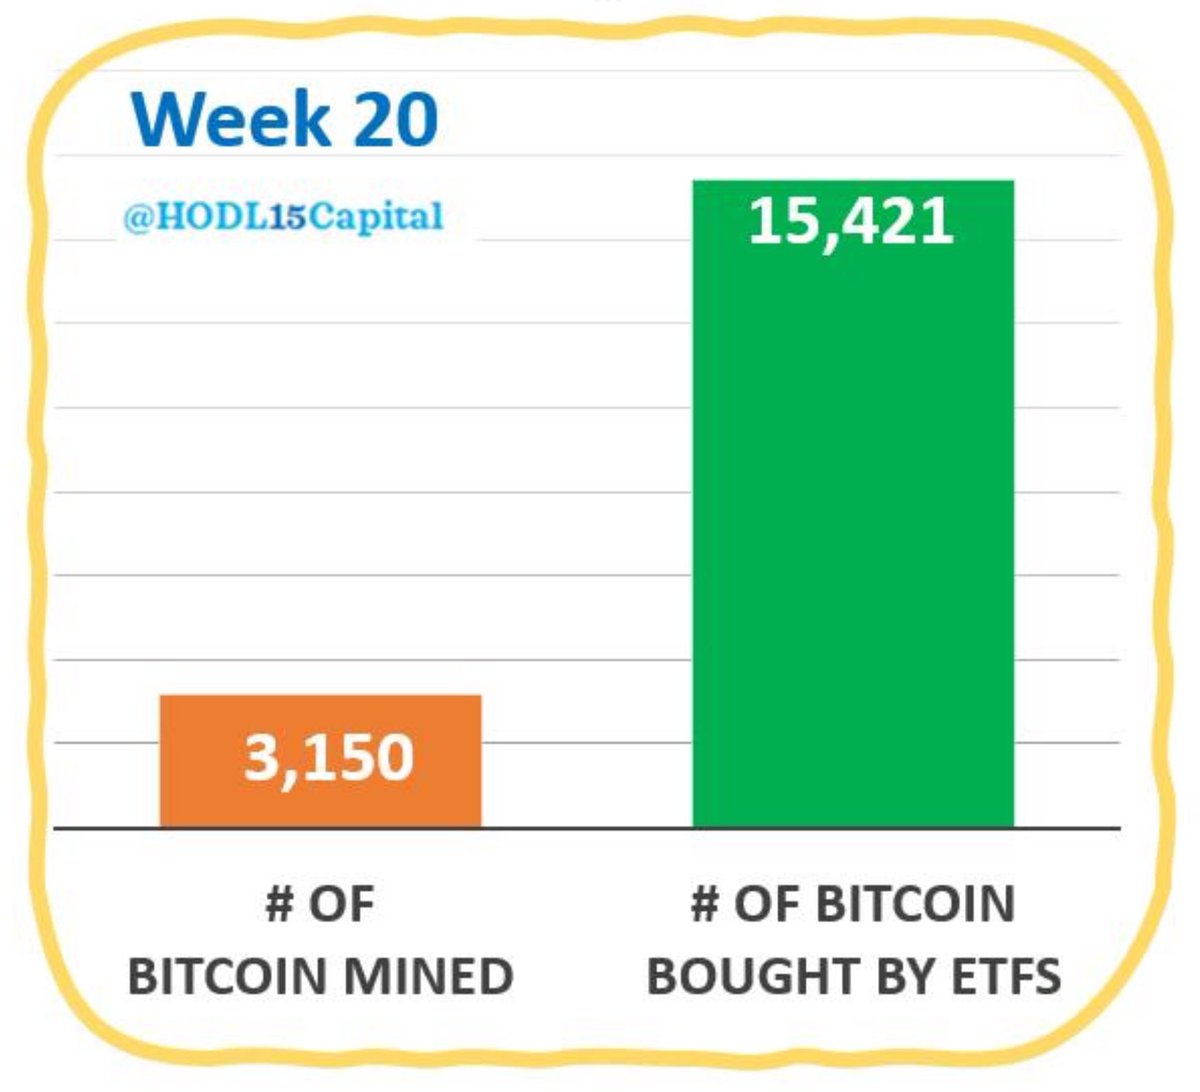 #Bitcoin  ETFs are buying over a month’s supply in a week

If this isn't a SUPPLY SHOCK, then what is? The price action will soon follow